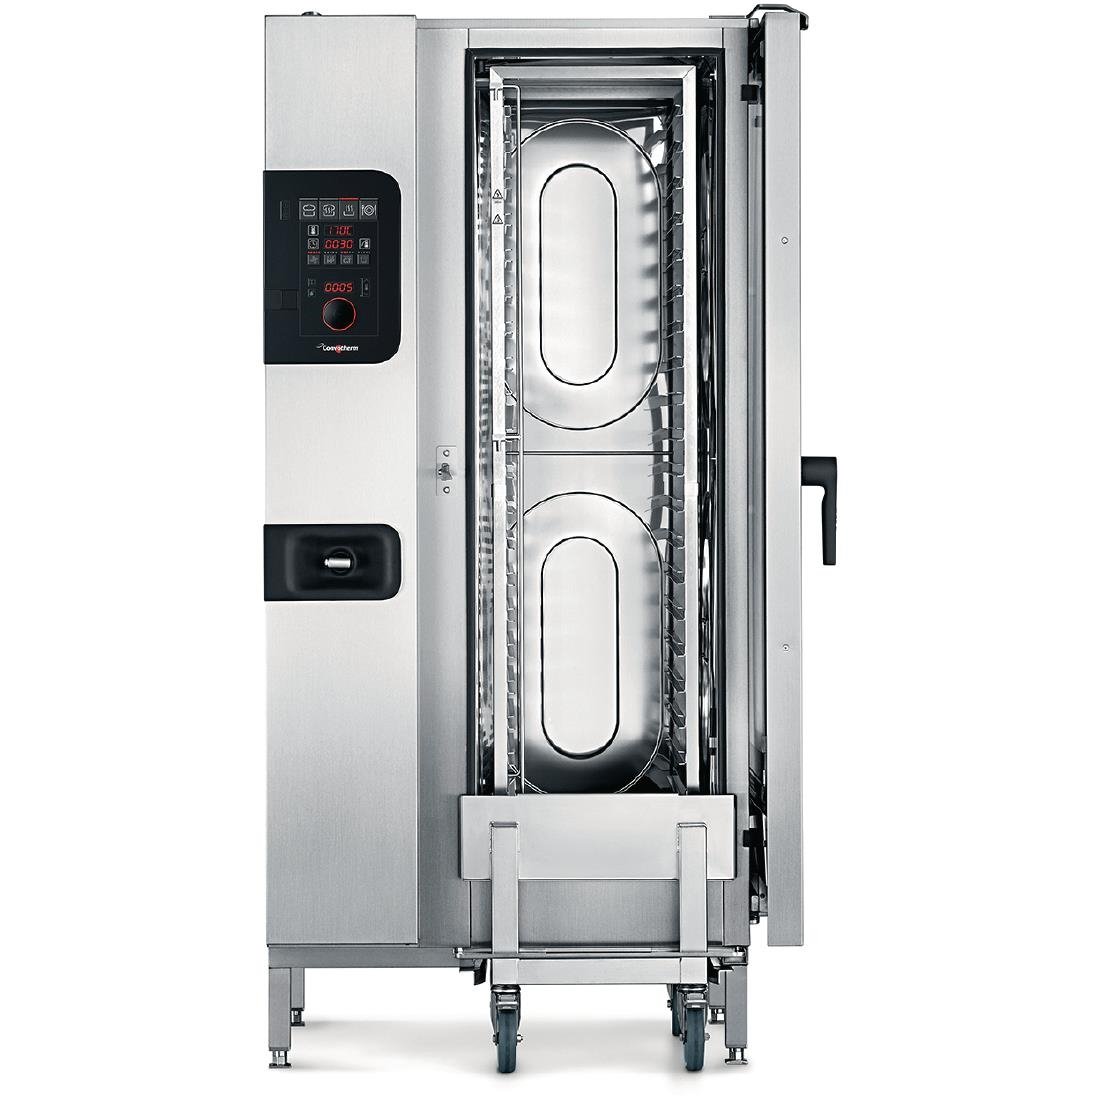 HC263-MO Convotherm 4 easyDial Combi Oven 20 x 1 x1 GN Grid with ConvoGrill JD Catering Equipment Solutions Ltd